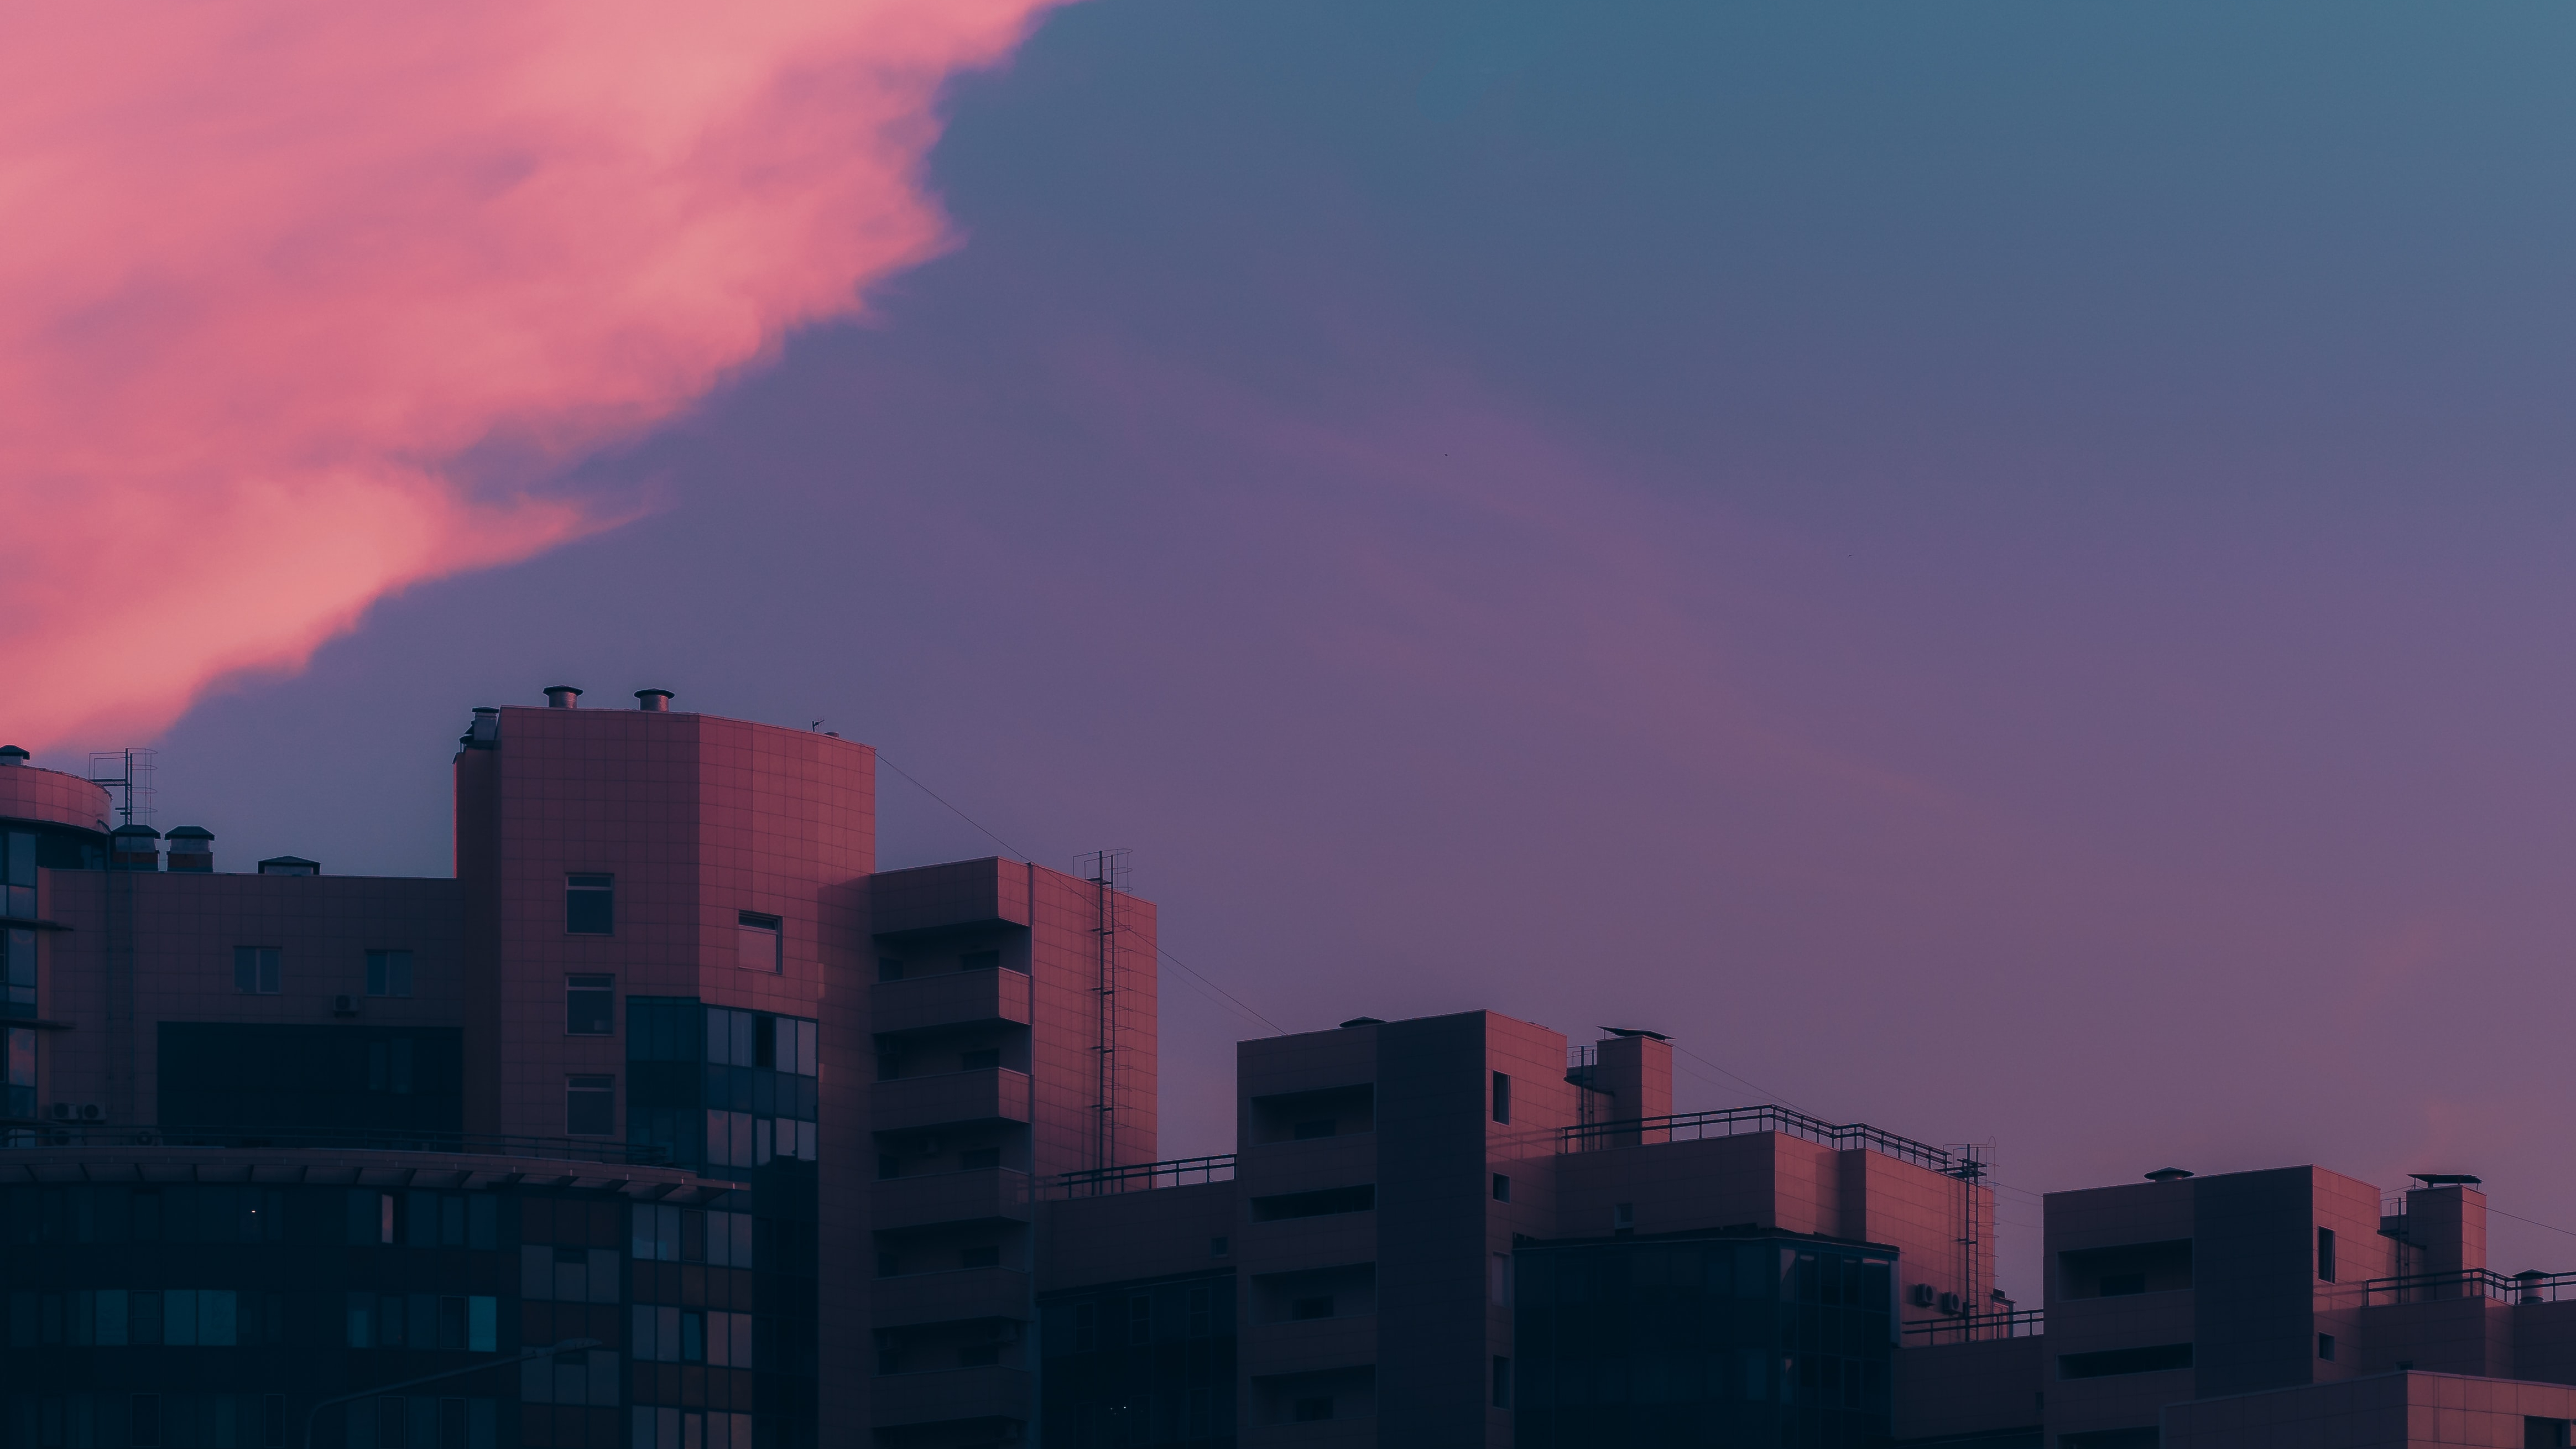 Sky Anime Pink Clouds Skyline Pink Clouds Building 4658x2620